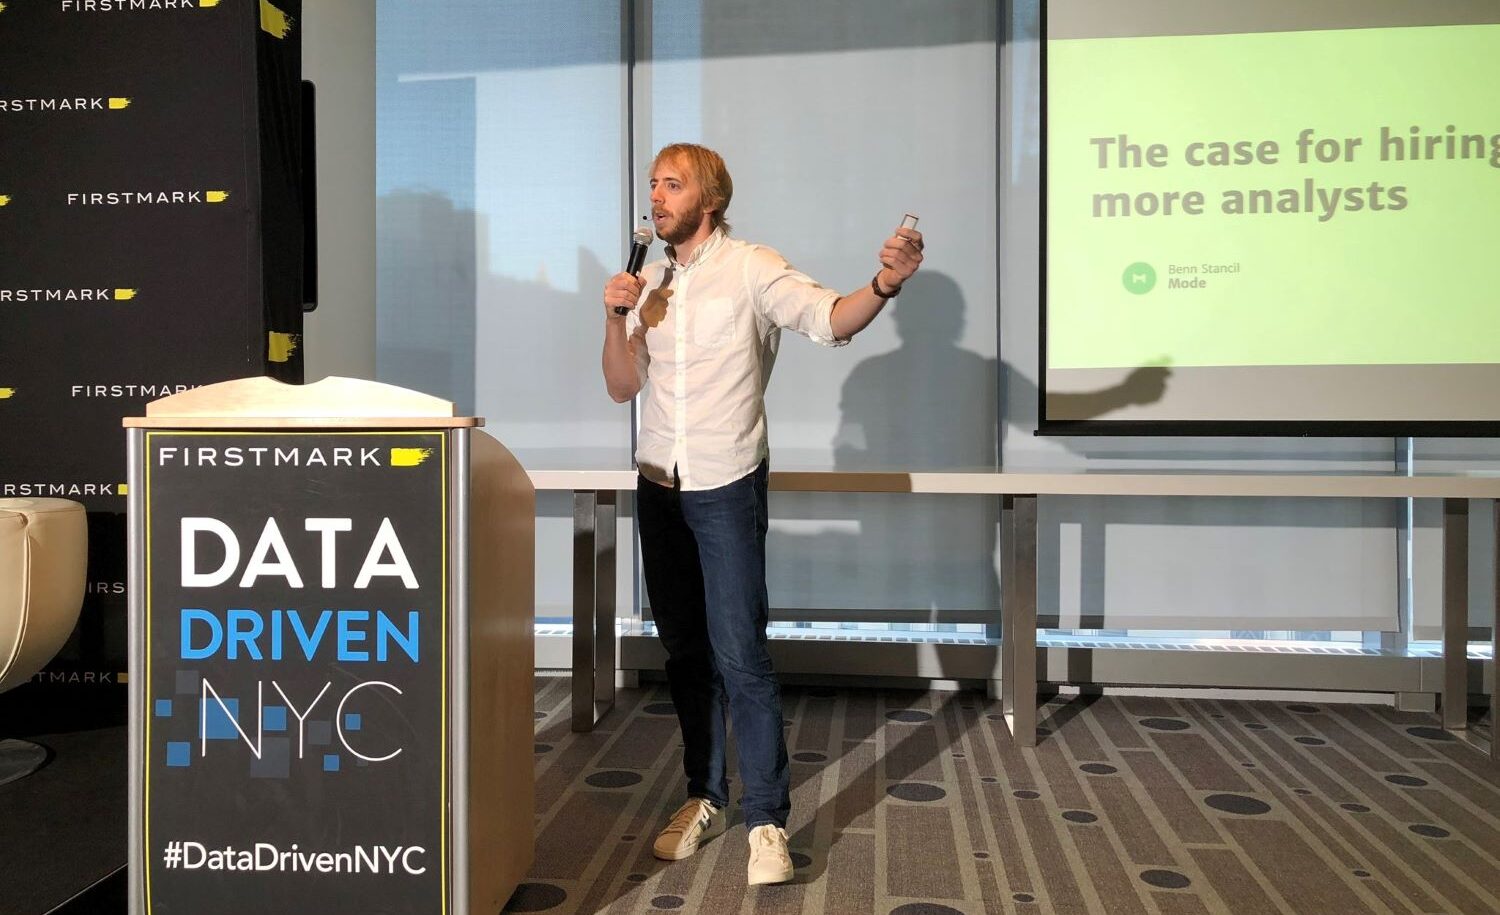 Mode Analytics CTO speaks at a data driven meetup event